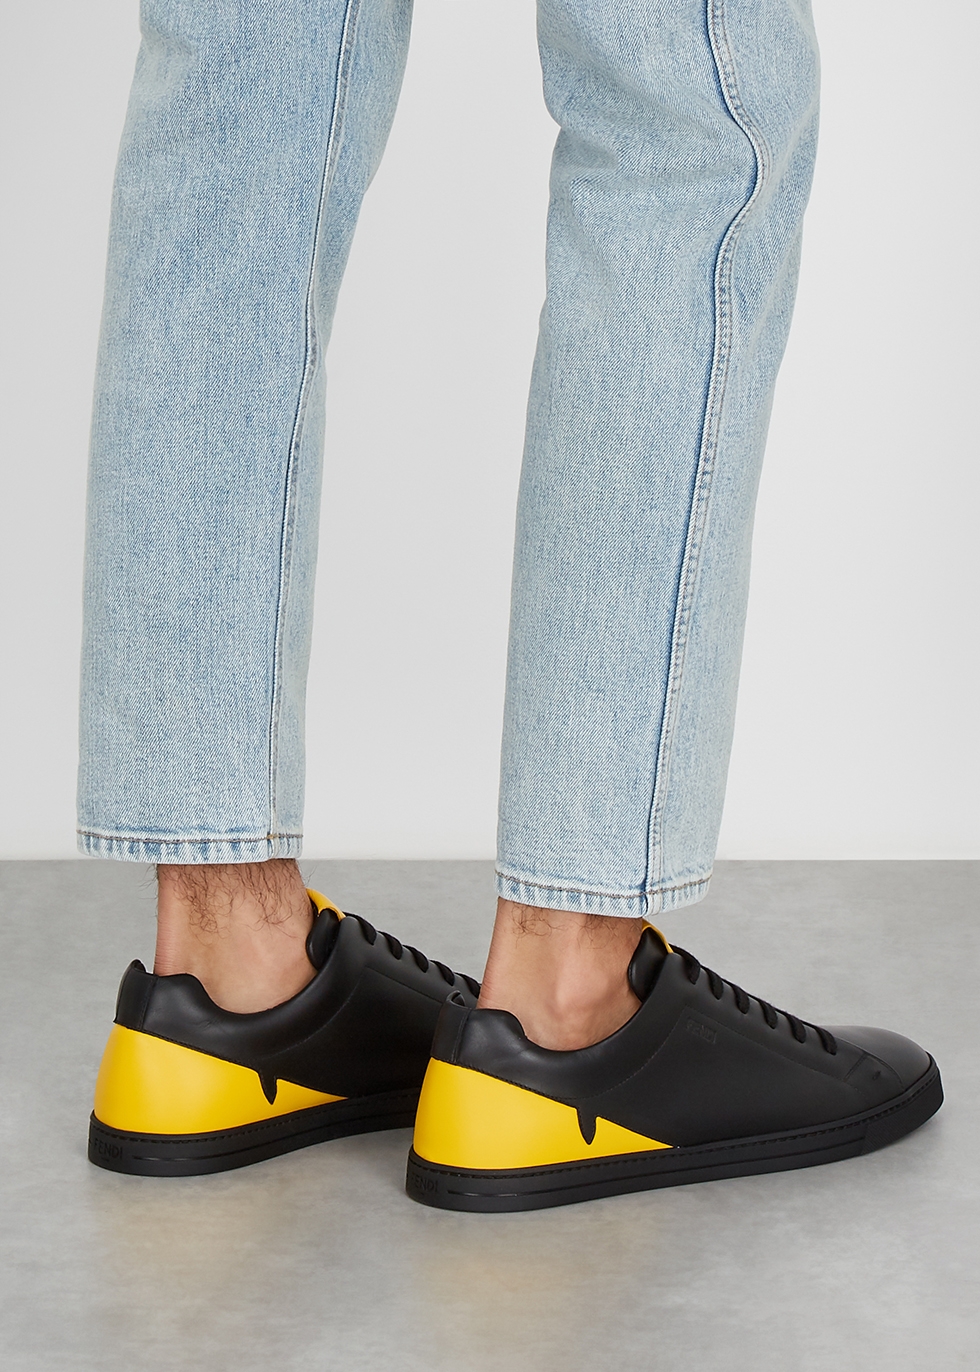 Fendi Black and yellow leather sneakers 